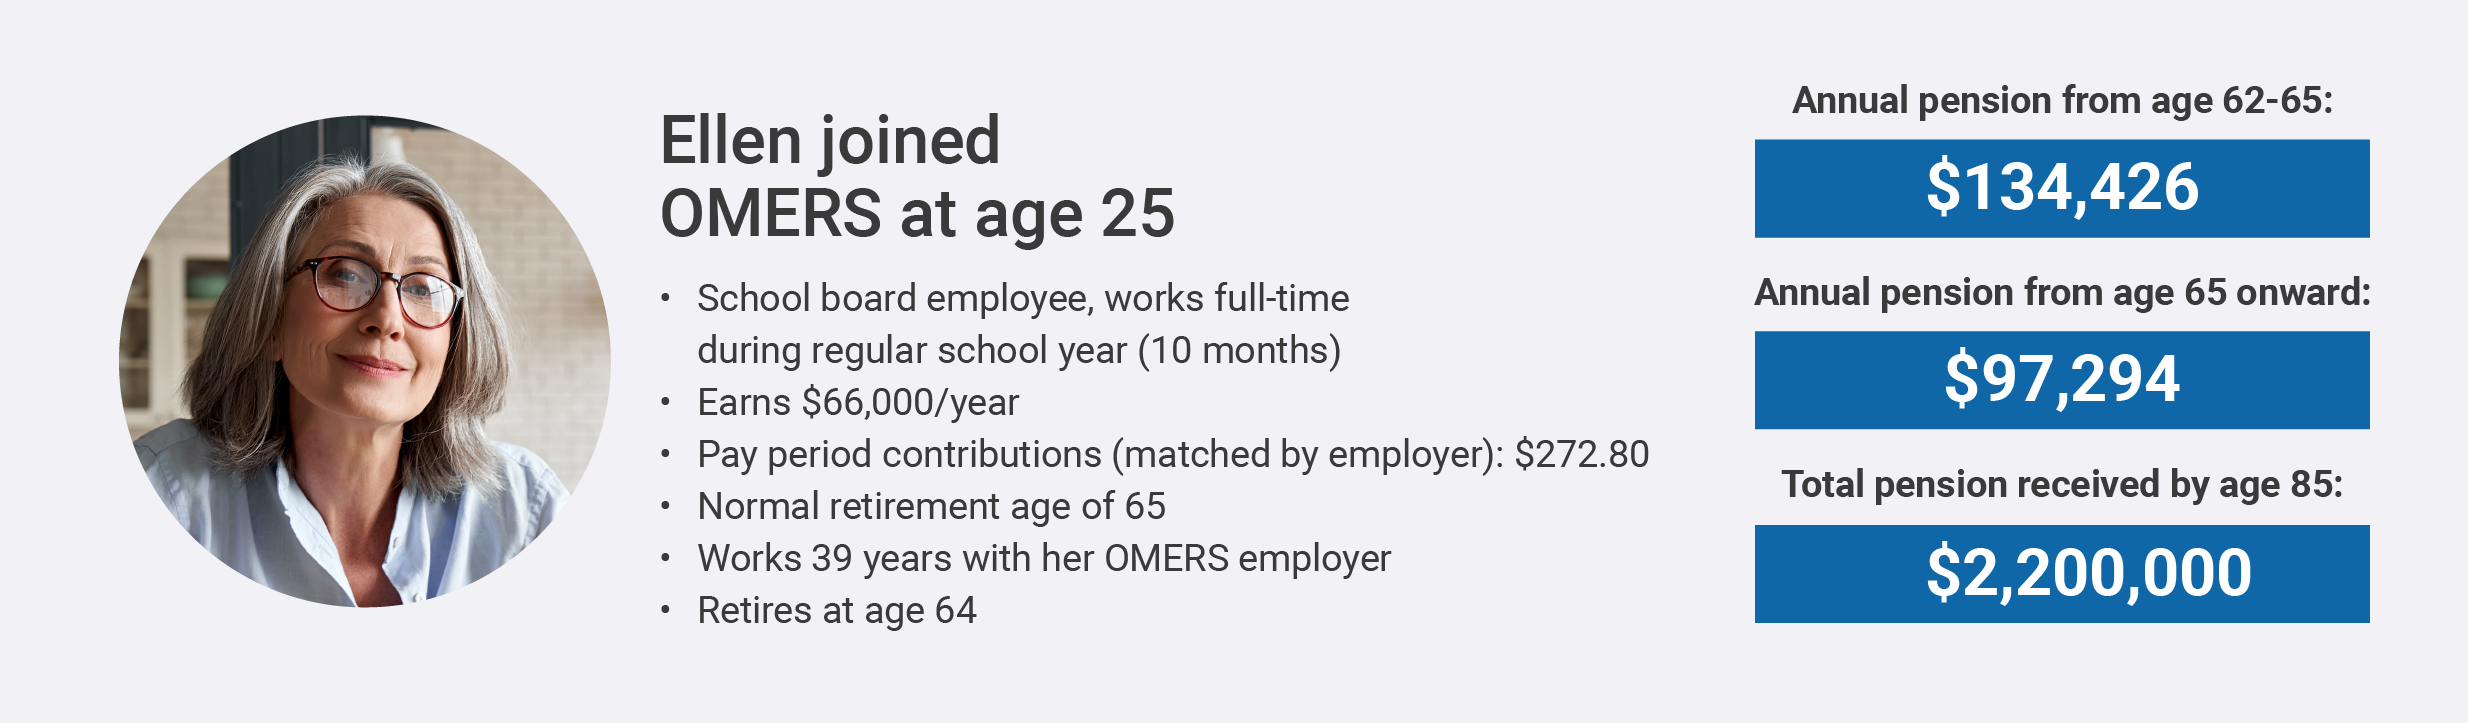 Ellen joined OMERS at age 25
• School board employee, works full-time during regular school year (10 months)
• Earns $66,000/year
• Pay period contributions (matched by employer): $272.80
• Normal retirement age of 65
• Works 39 years with her OMERS employer
• Retires at age 64

Annual pension from age 62-65: $134,426
Annual pension from age 65 onward: $97,294
Total pension received by age 85: $2,200,000